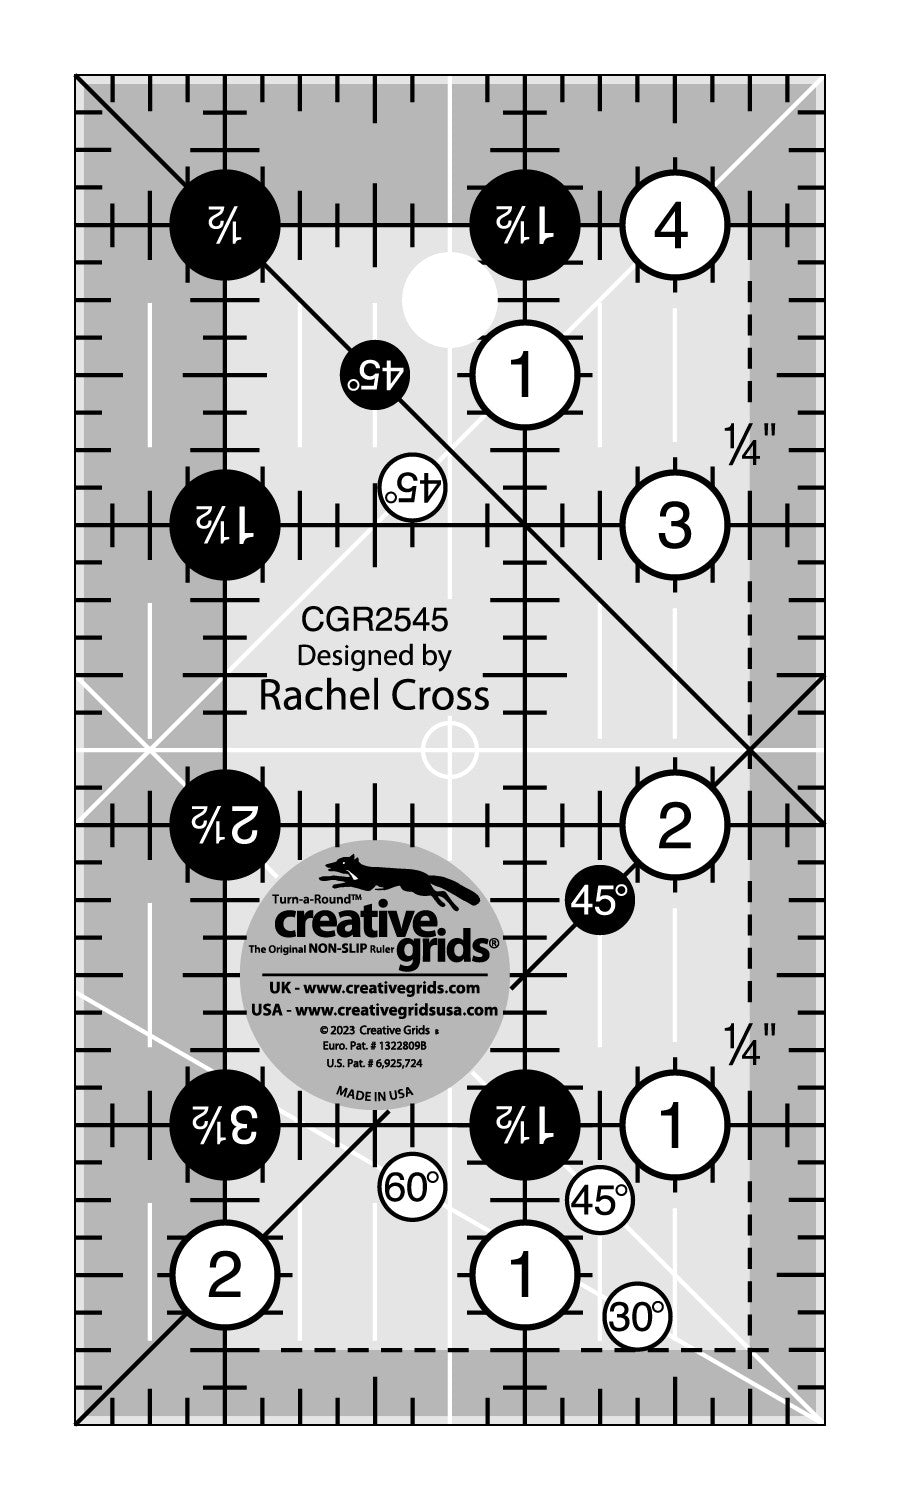 Creative Grids Ultimate Flying Geese Template and Quilt Ruler